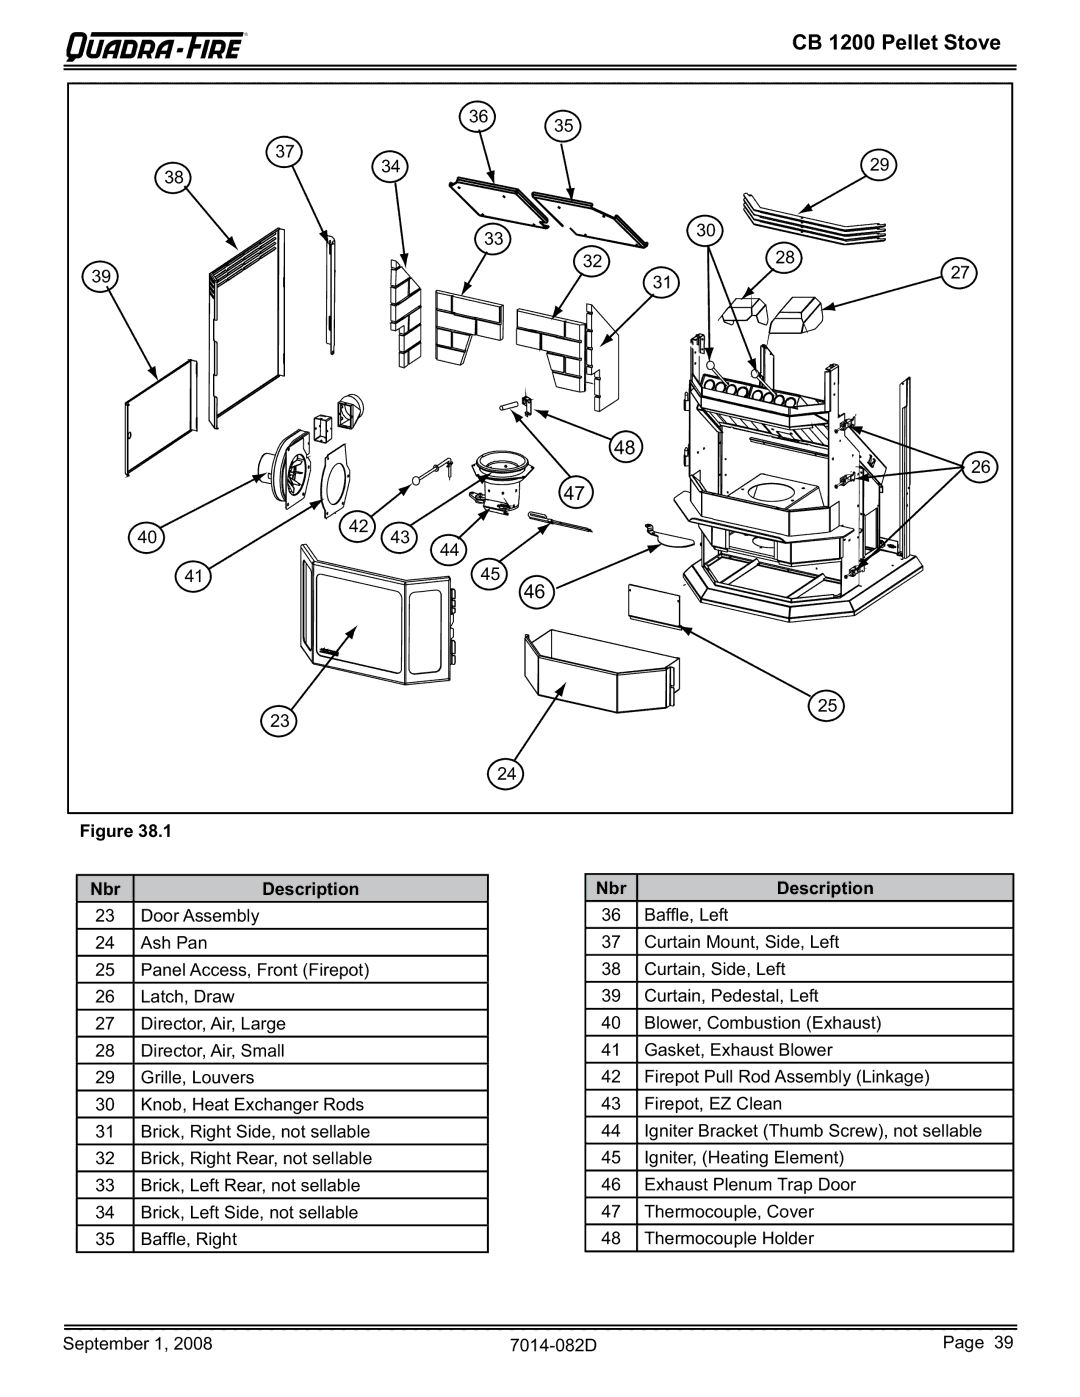 Hearth and Home Technologies CB1200-B owner manual CB 1200 Pellet Stove, Nbr Description 